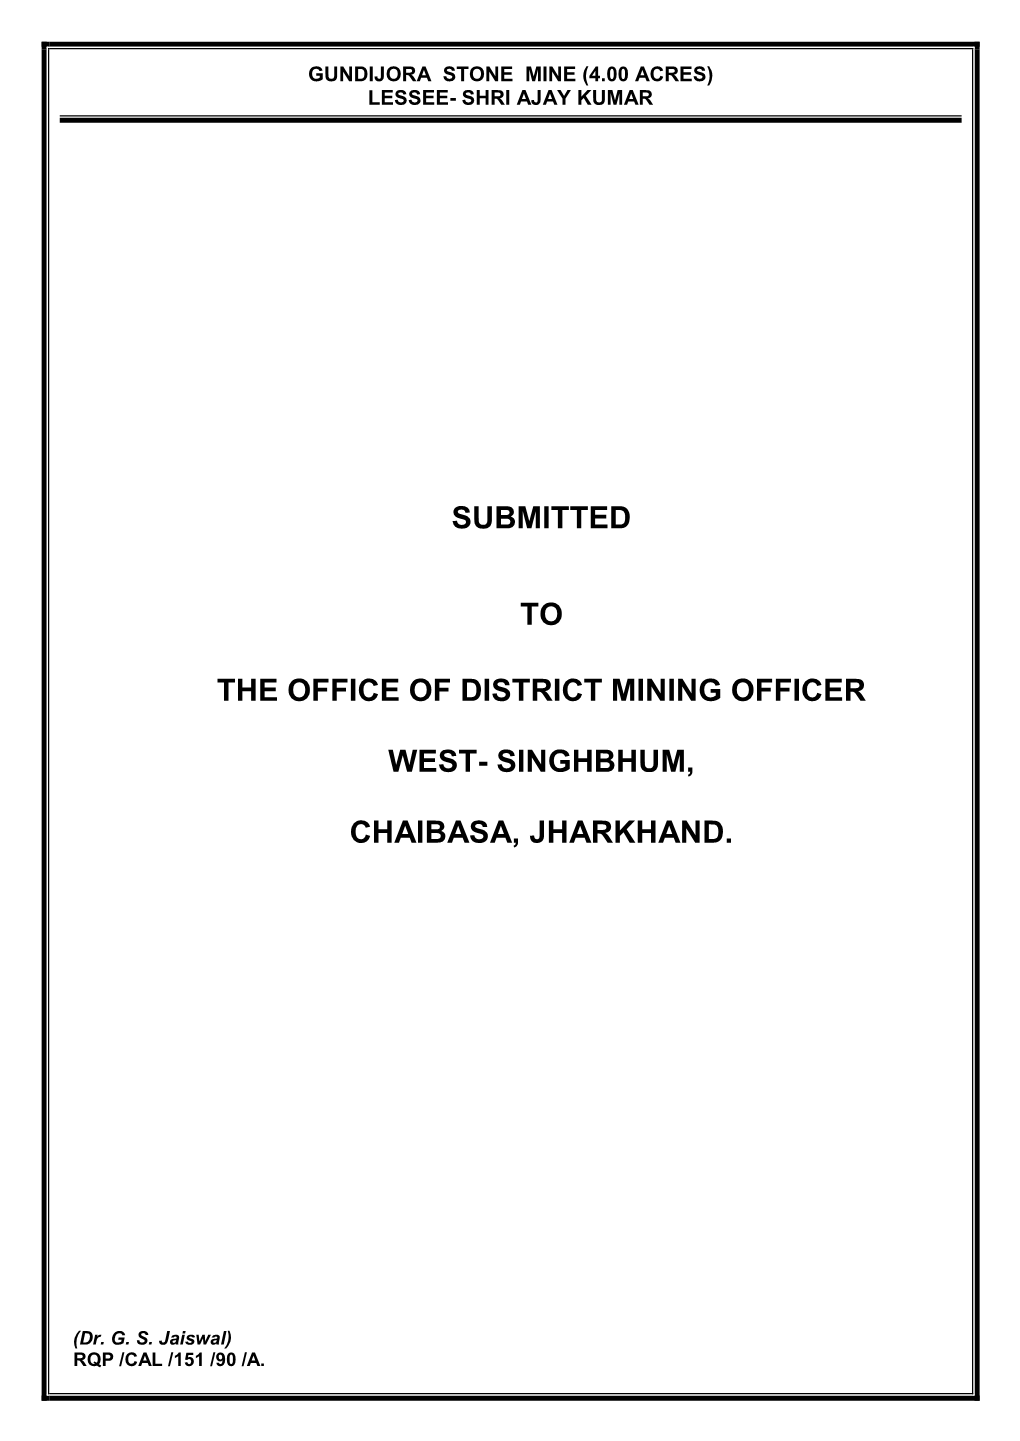 Submitted to the Office of District Mining Officer West- Singhbhum, Chaibasa